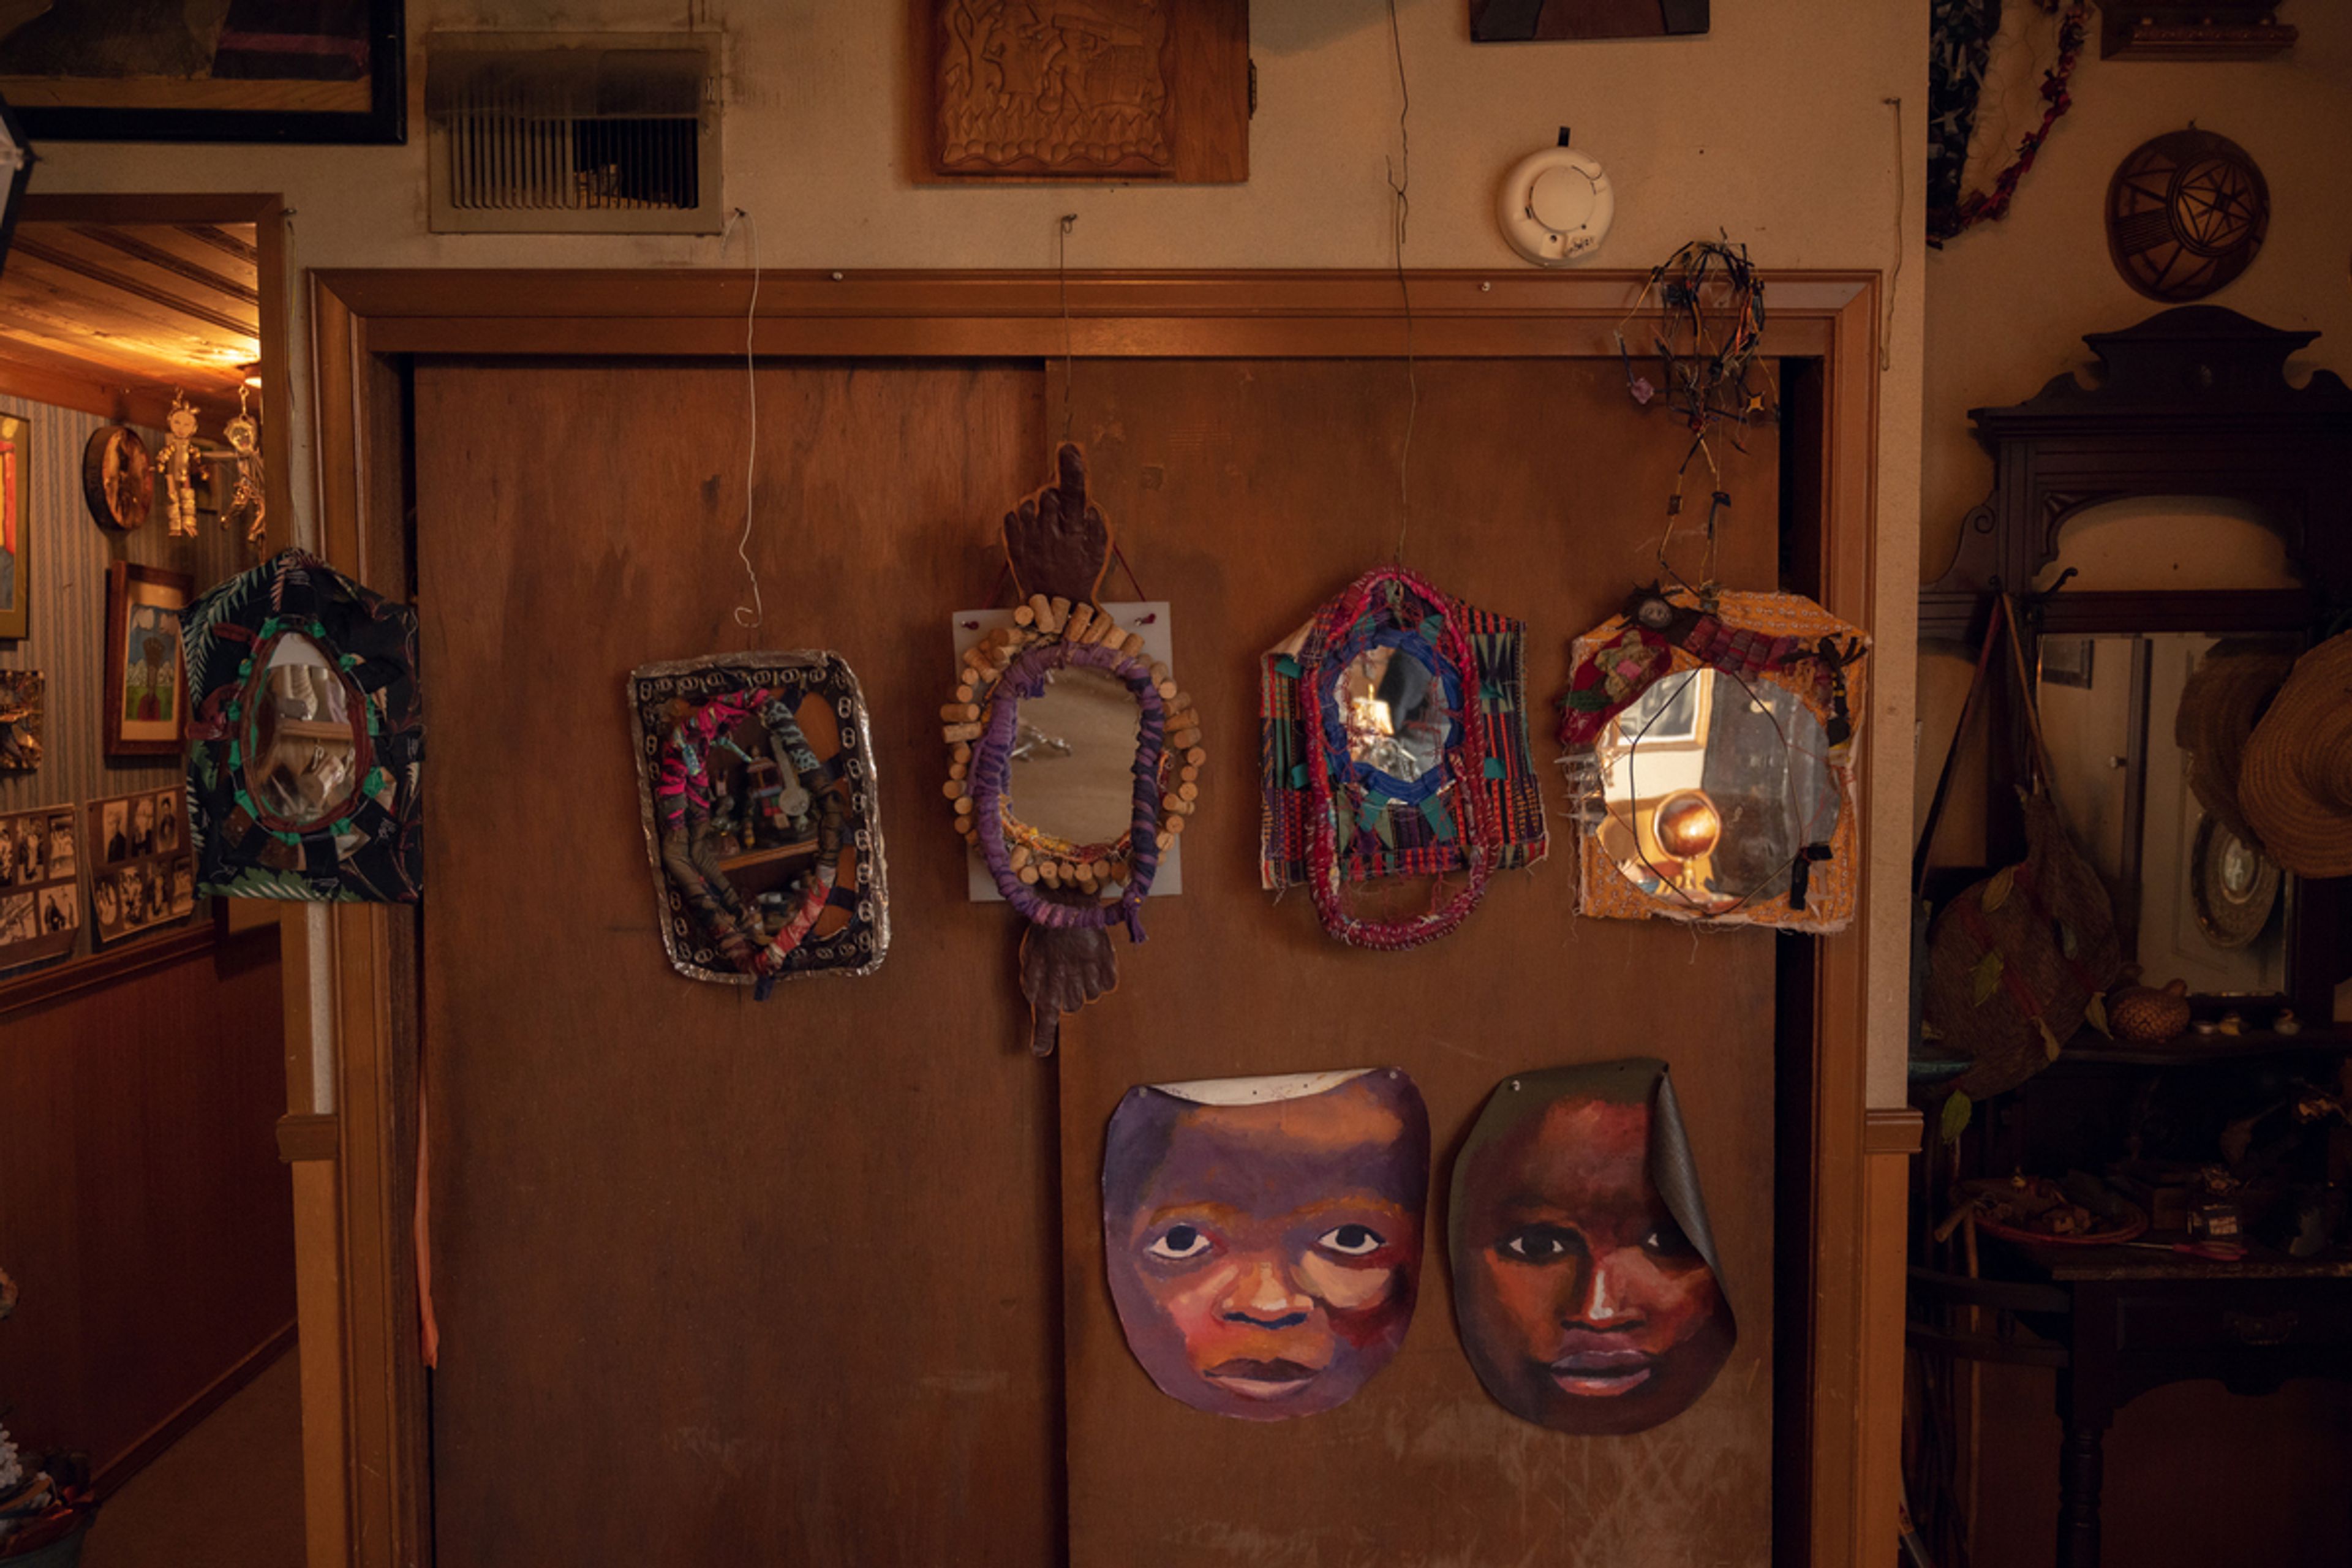 closet door with paper masks (depicting faces) and bracelets on top